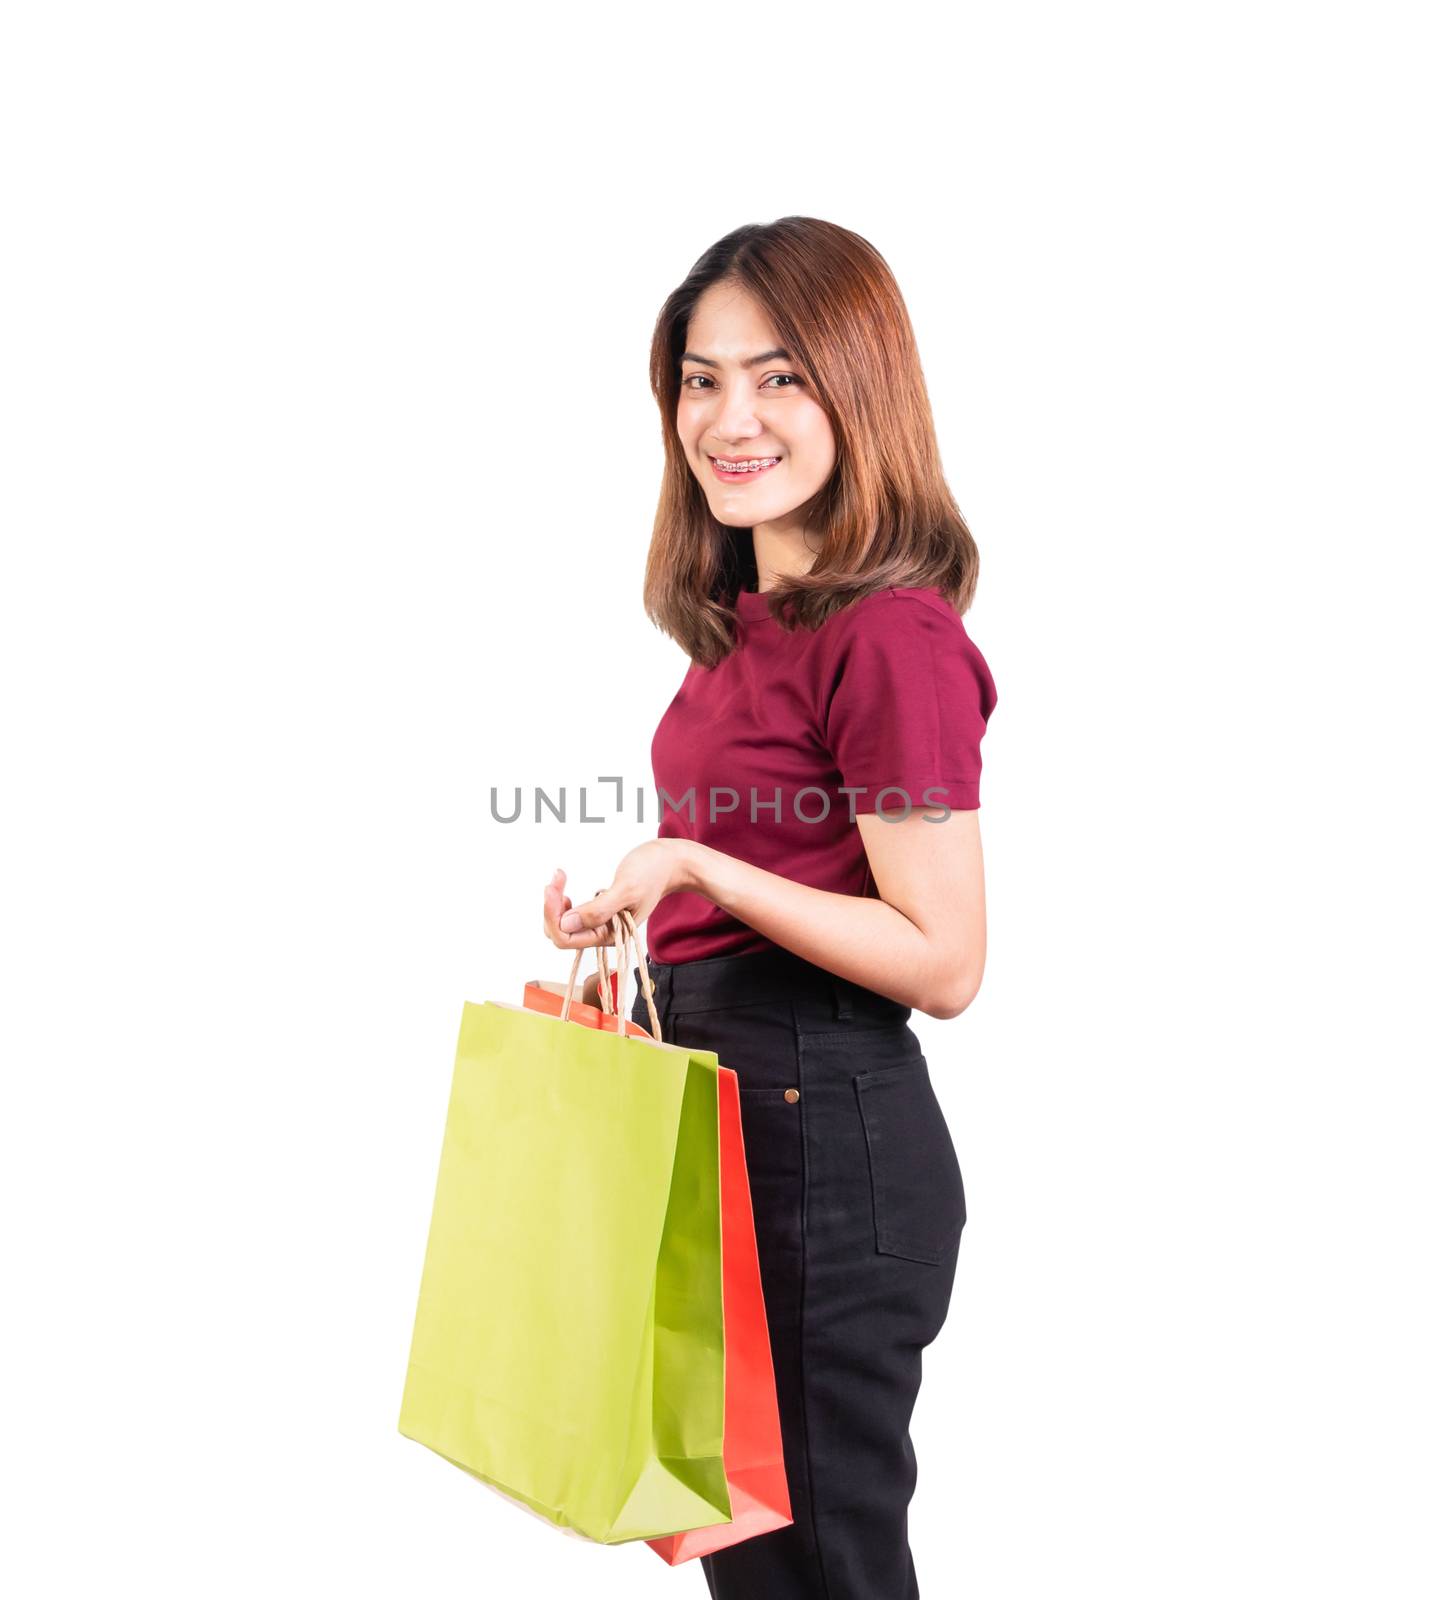 young woman pretty smiling holding paper bags green and orange shopping. isolated on white background and looking at camera